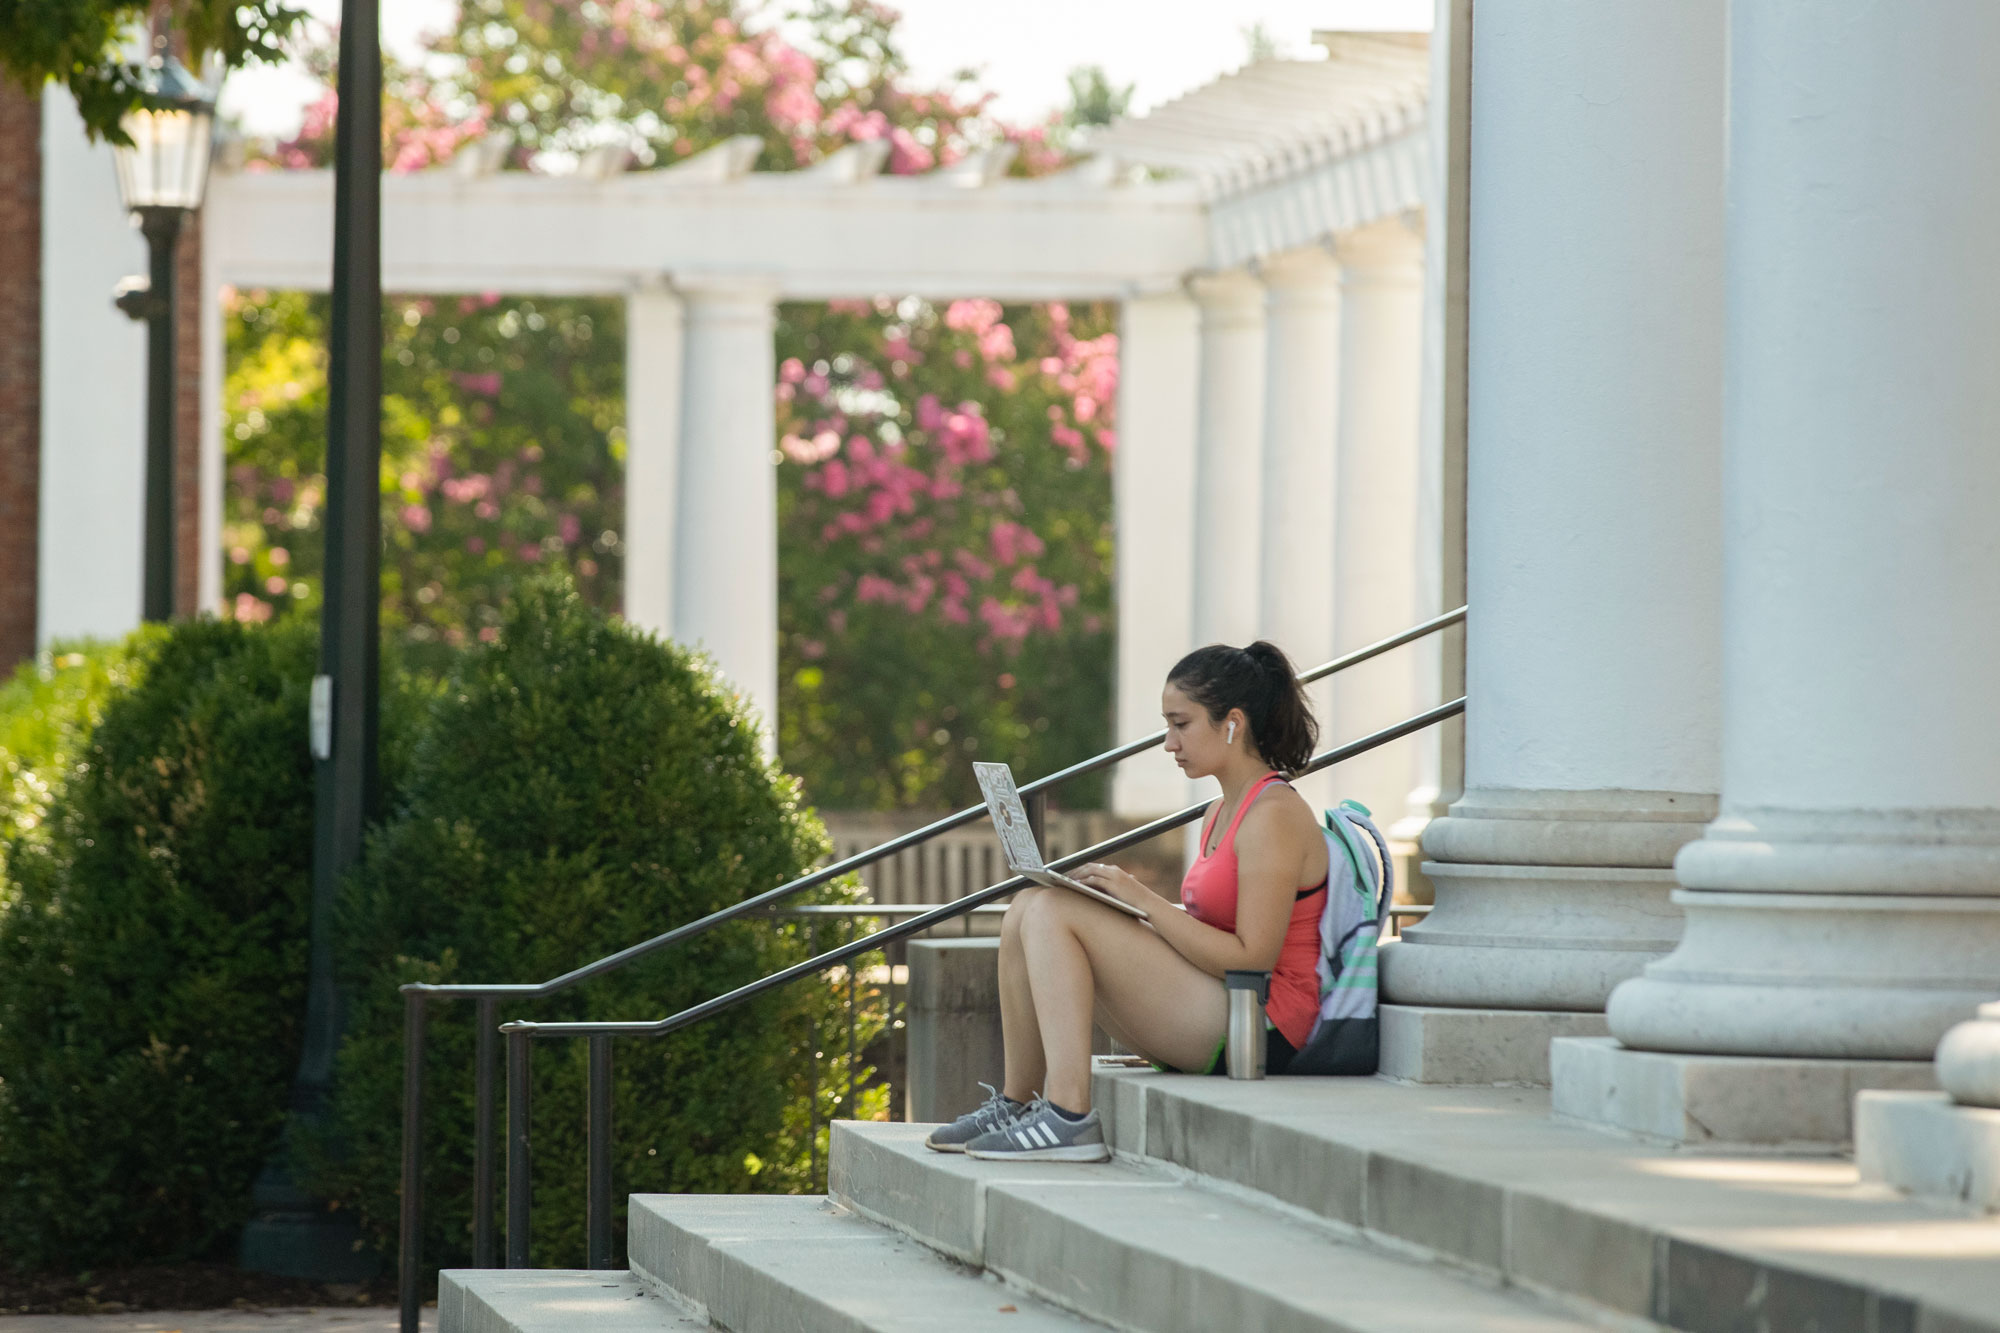 A UVA student wearing a backpack works on a laptop while seated on the steps of the Rotunda